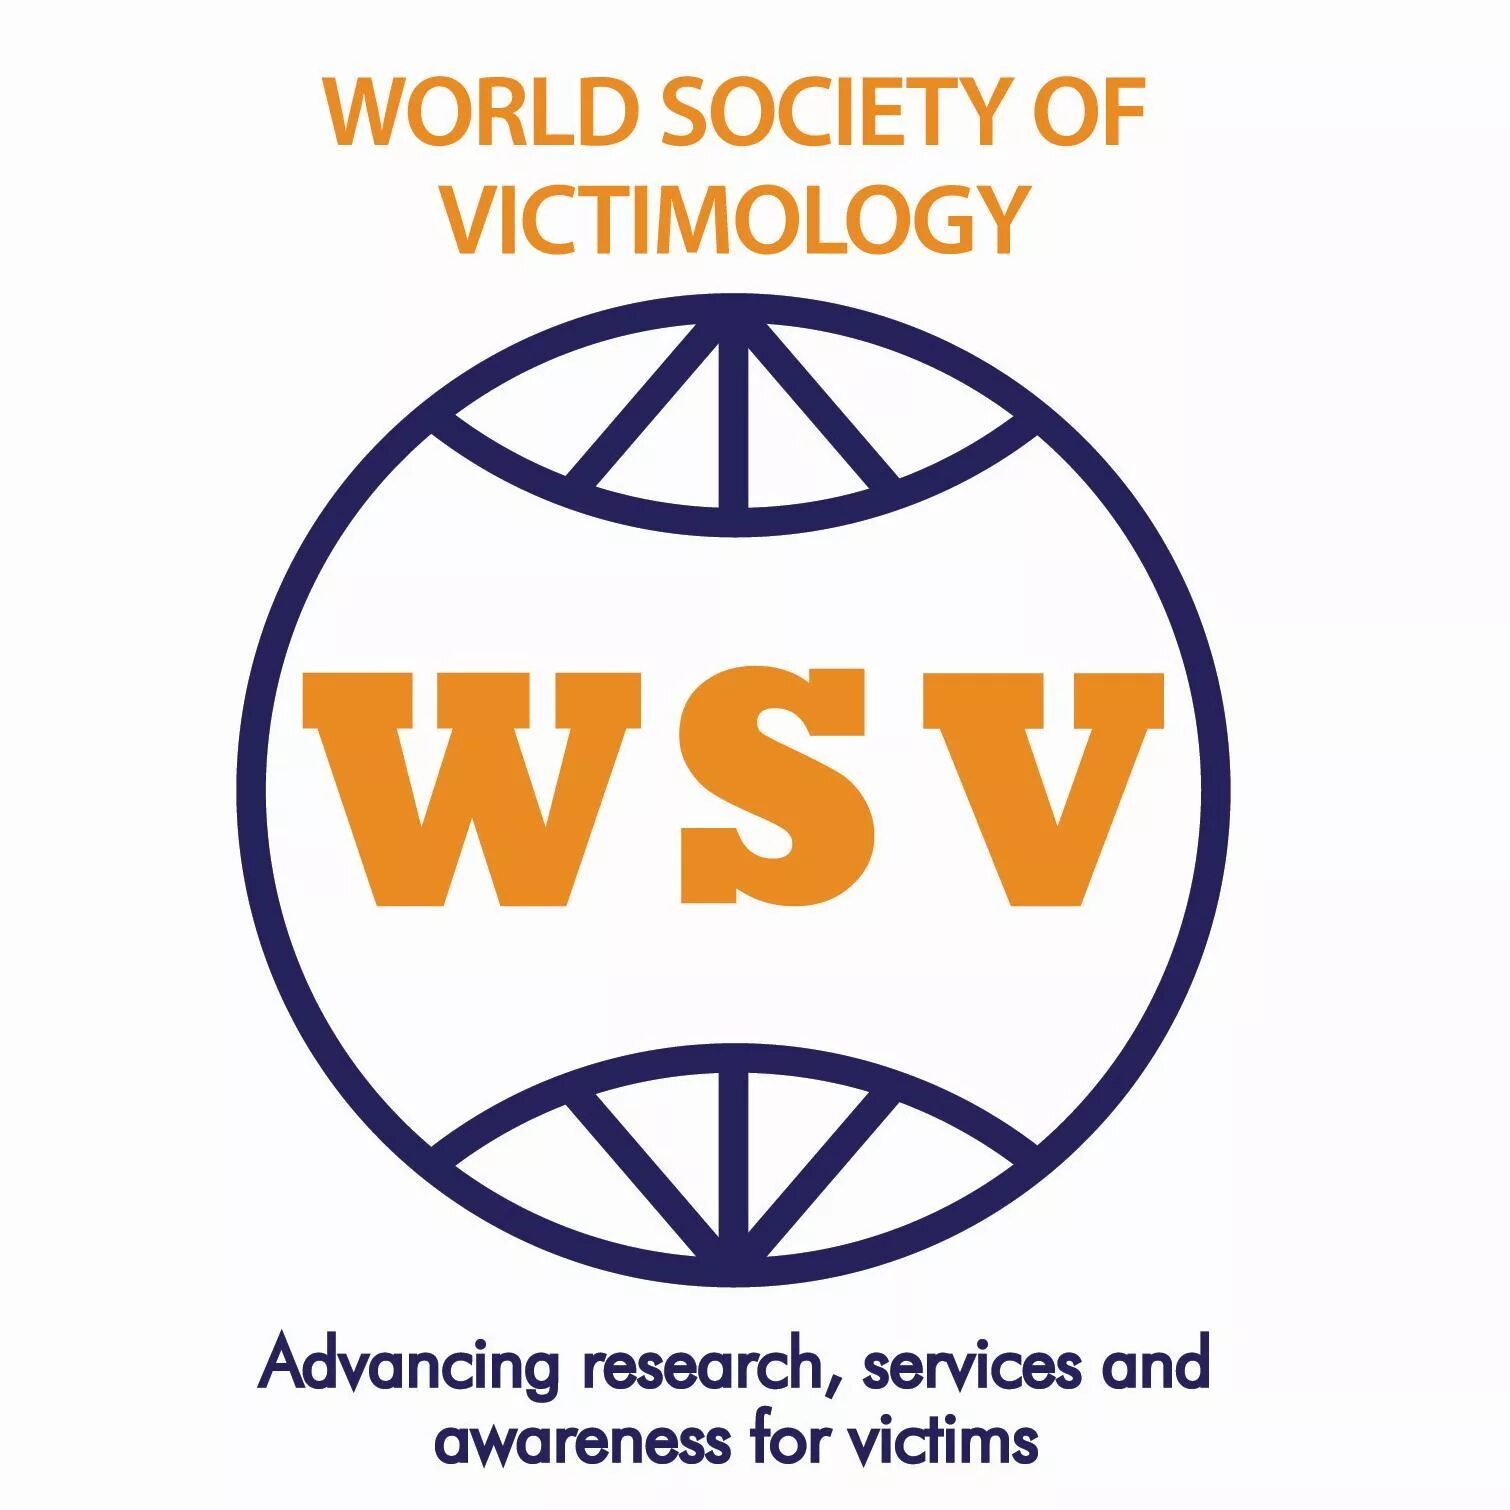 World society. WSV. Victimology and victim rights. Understanding Victimology.